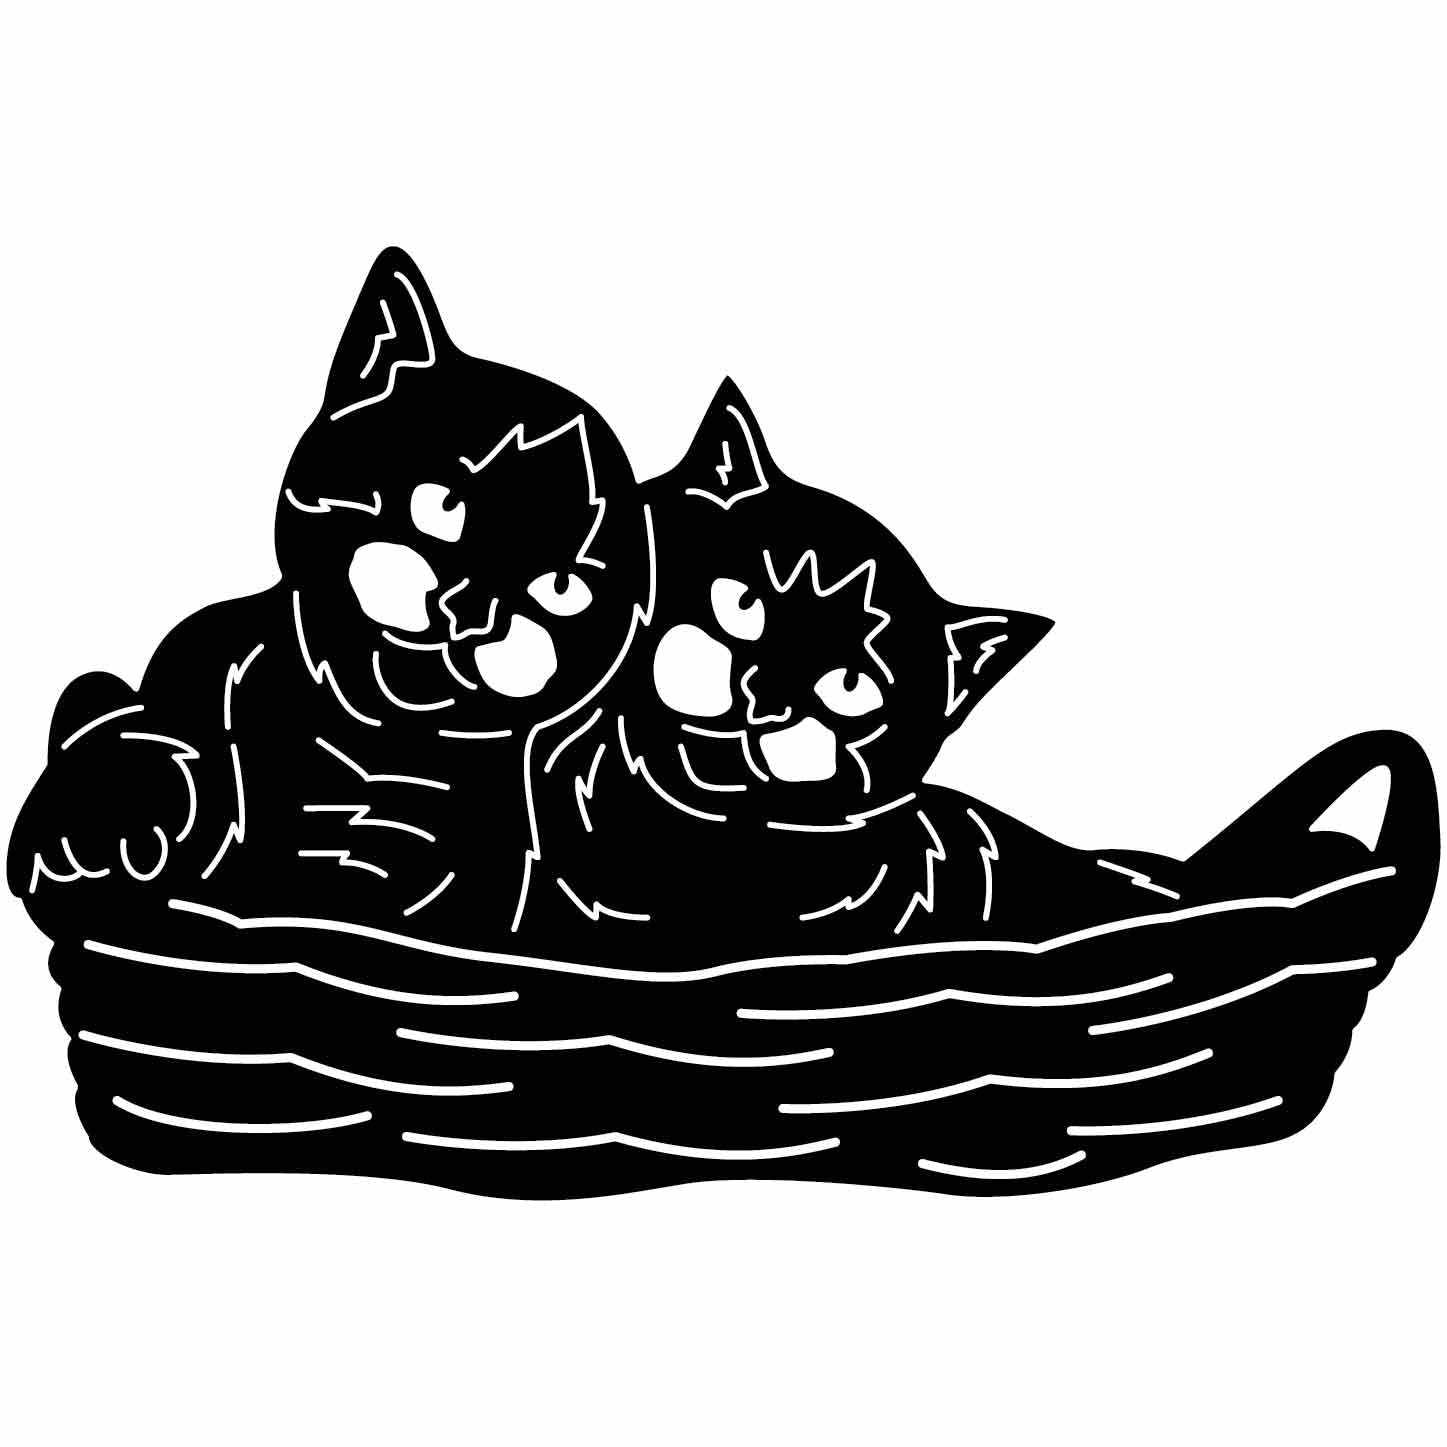 Two Cats in Basket PlayingFree-DXF files cut ready for CNC-DXFforCNC.com